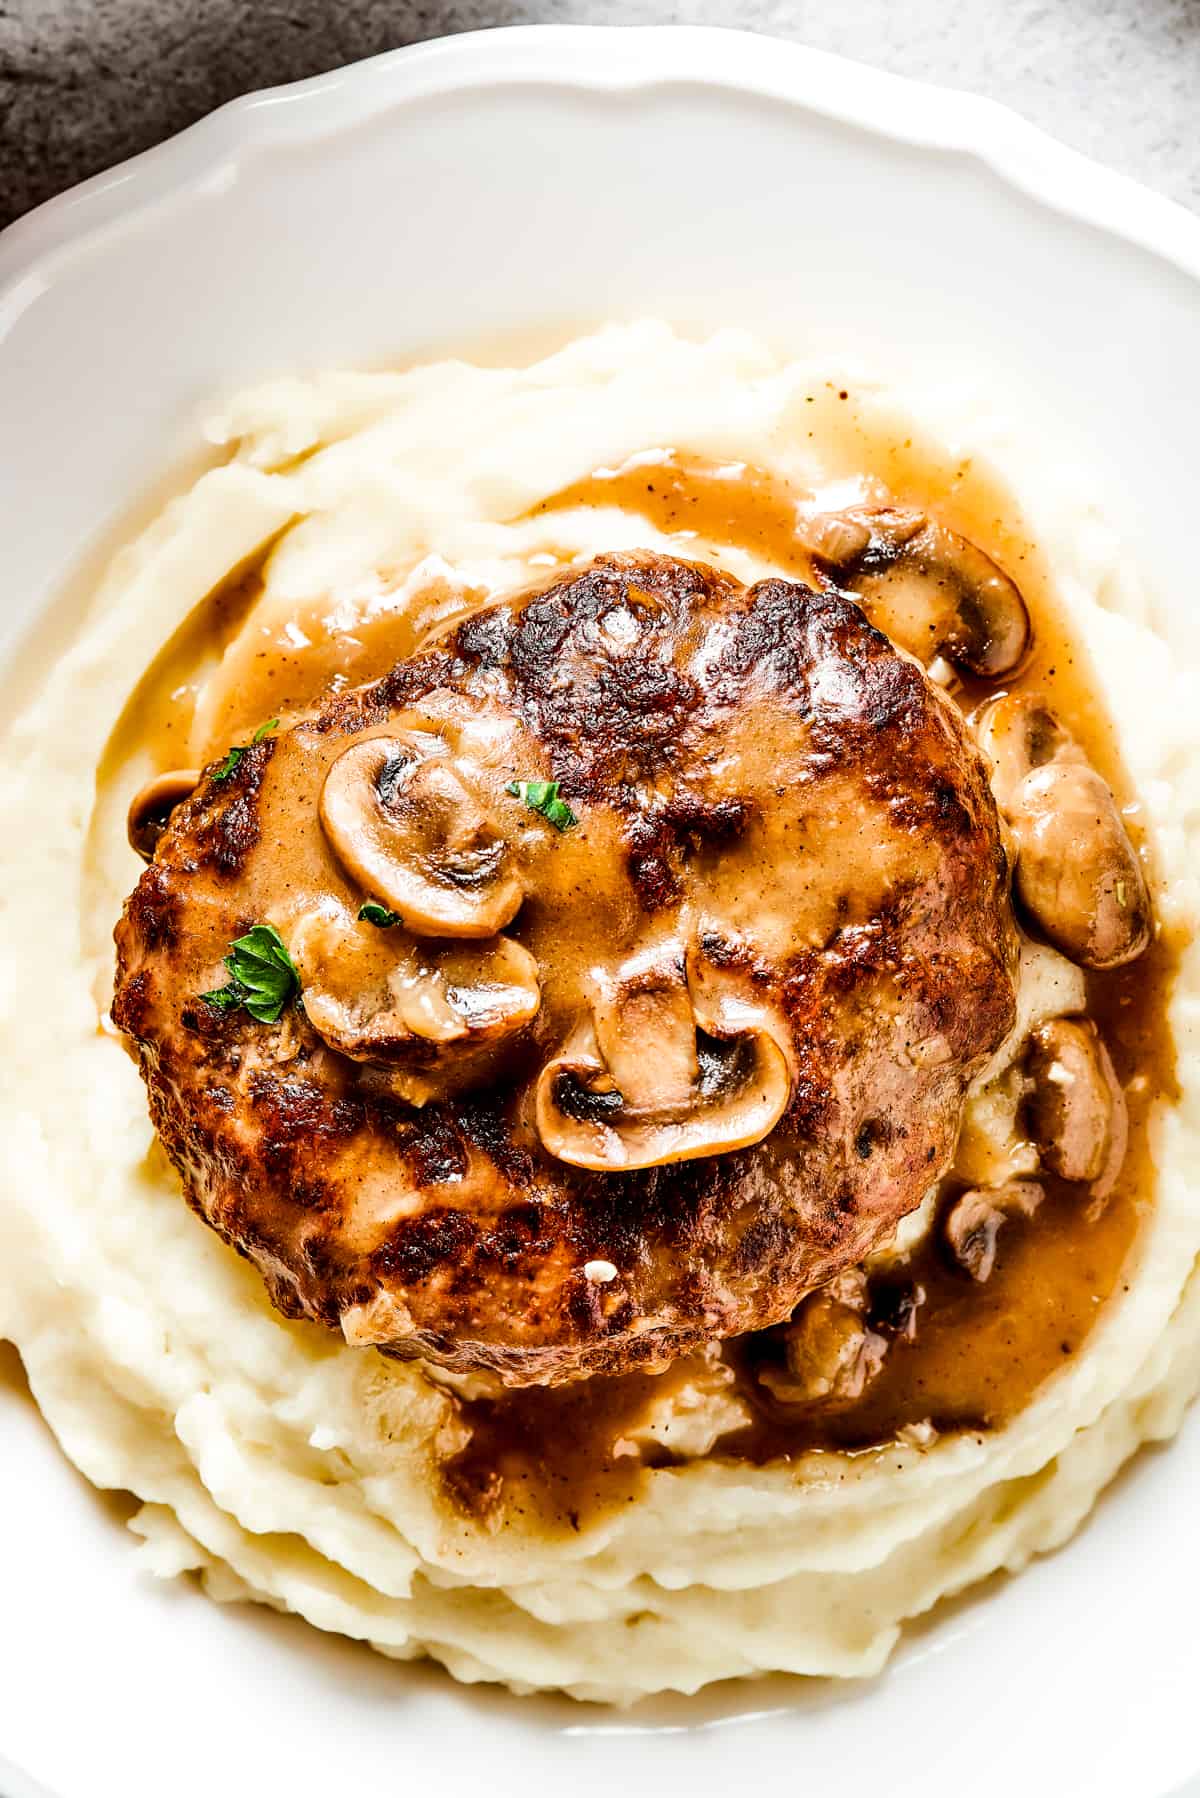 Salisbury steak with mushroom gravy served on a dinner plate over mashed potatoes.